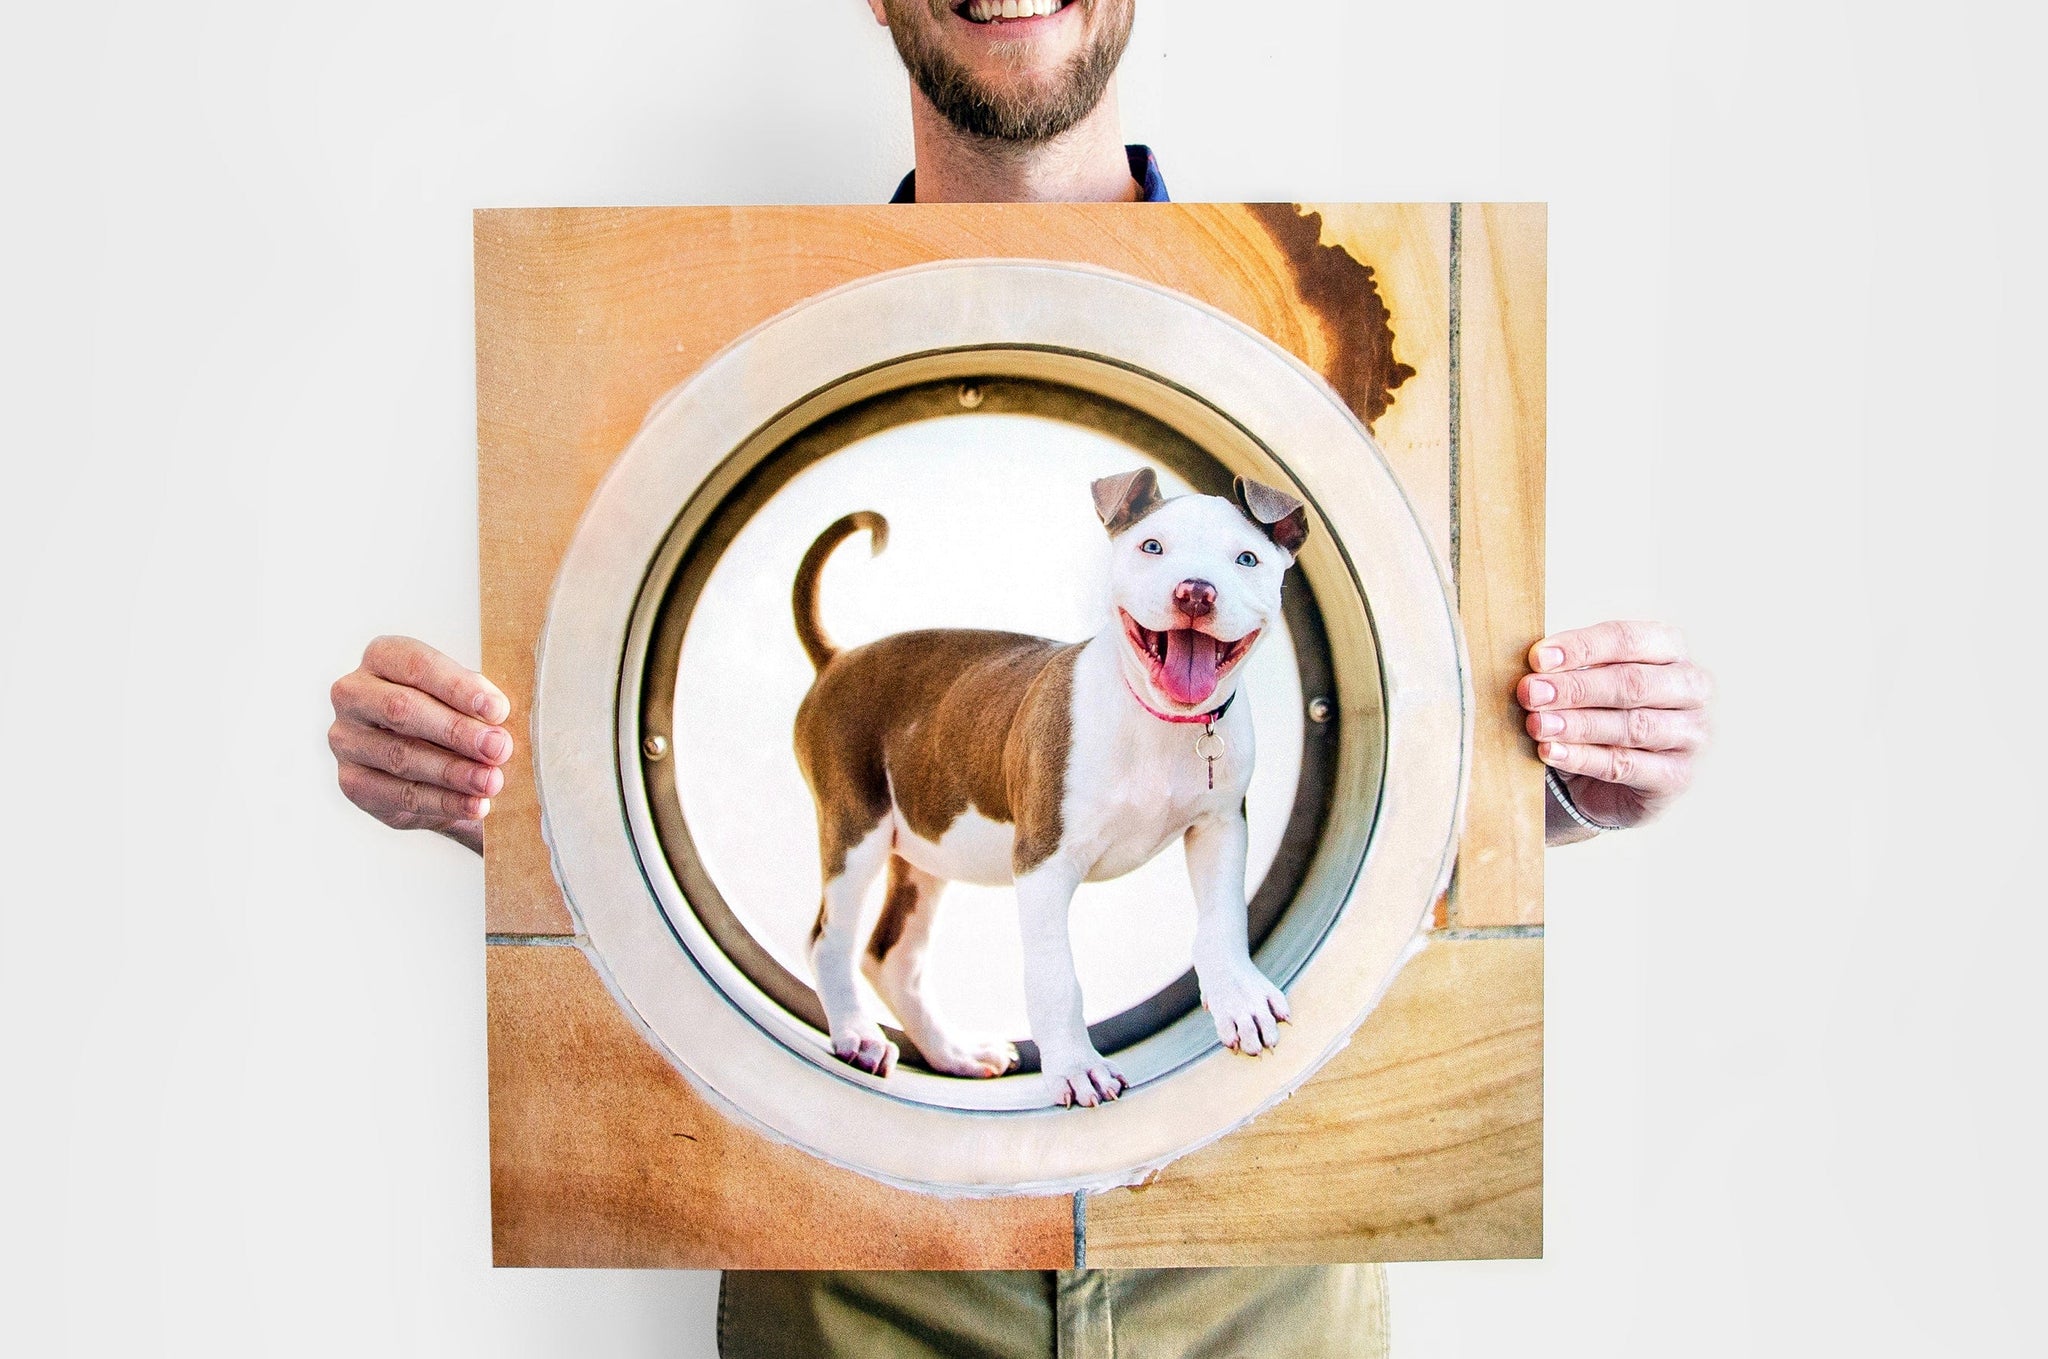 24x24" Square Photo Print being held up by a man. The Photo Print features a picture of a happy looking dog.